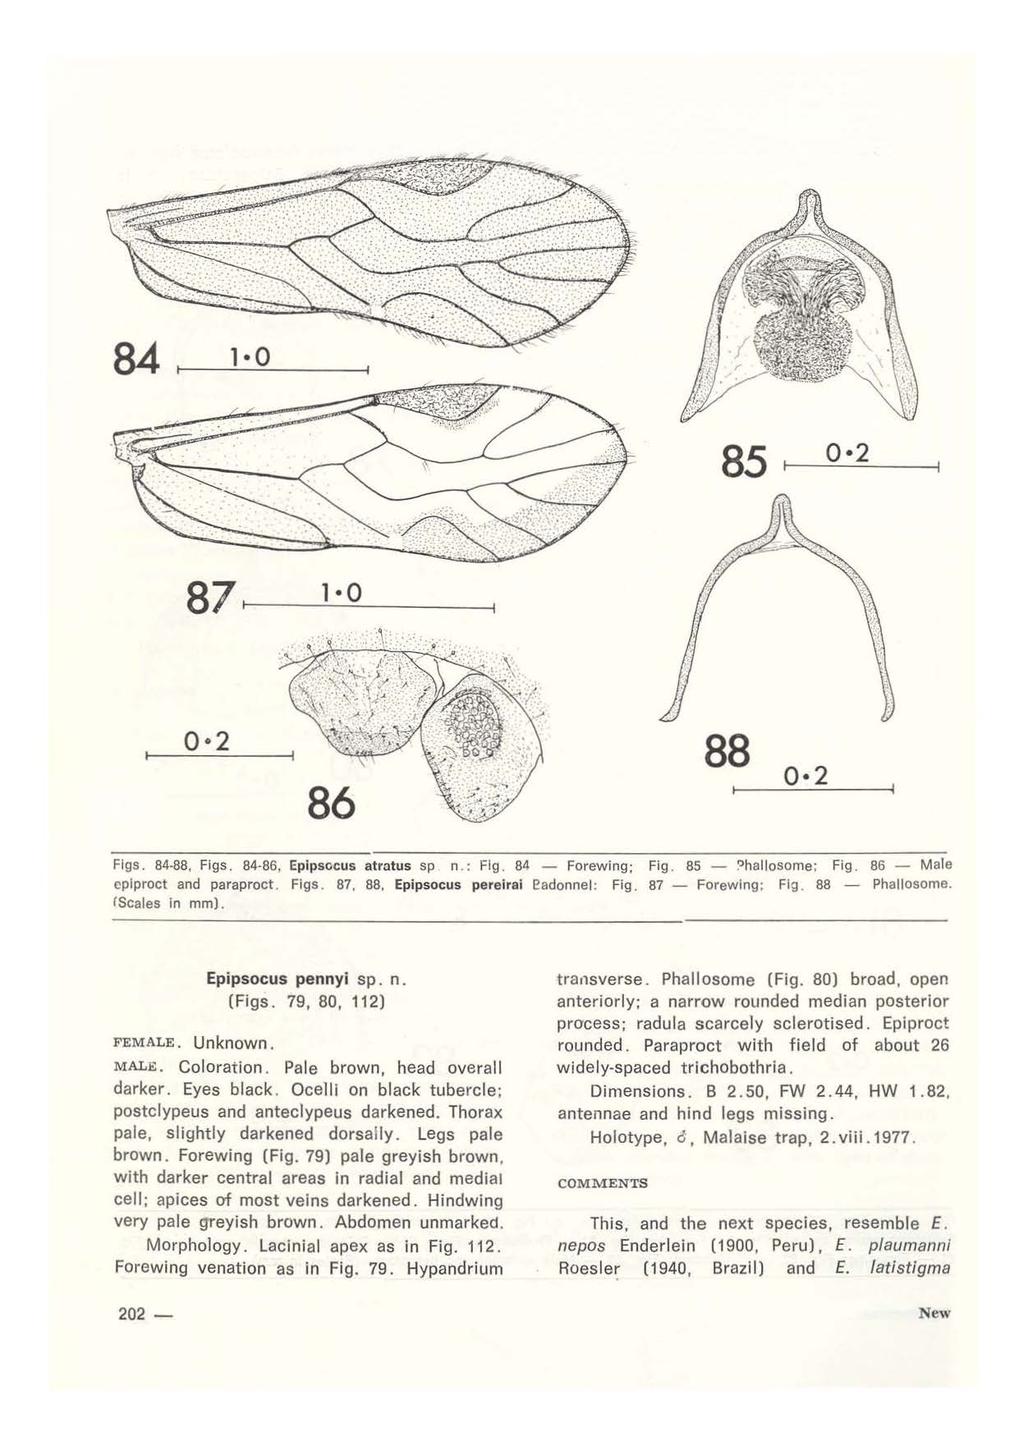 84 1 0 85 0 2 87 t---- 1'---' 0::... -----1 0 2 86 88 0 2 Flgs. 84-88, Figs. 84-86, Epipsccus atratus sp n. : Fig. 84 - Forewing; Fig. 85 -?hallosome; Fig. 86 - M ale cplproct and paraproct. Figs. 87, 88, Epipsocus pereirai eadonnel: Fig.